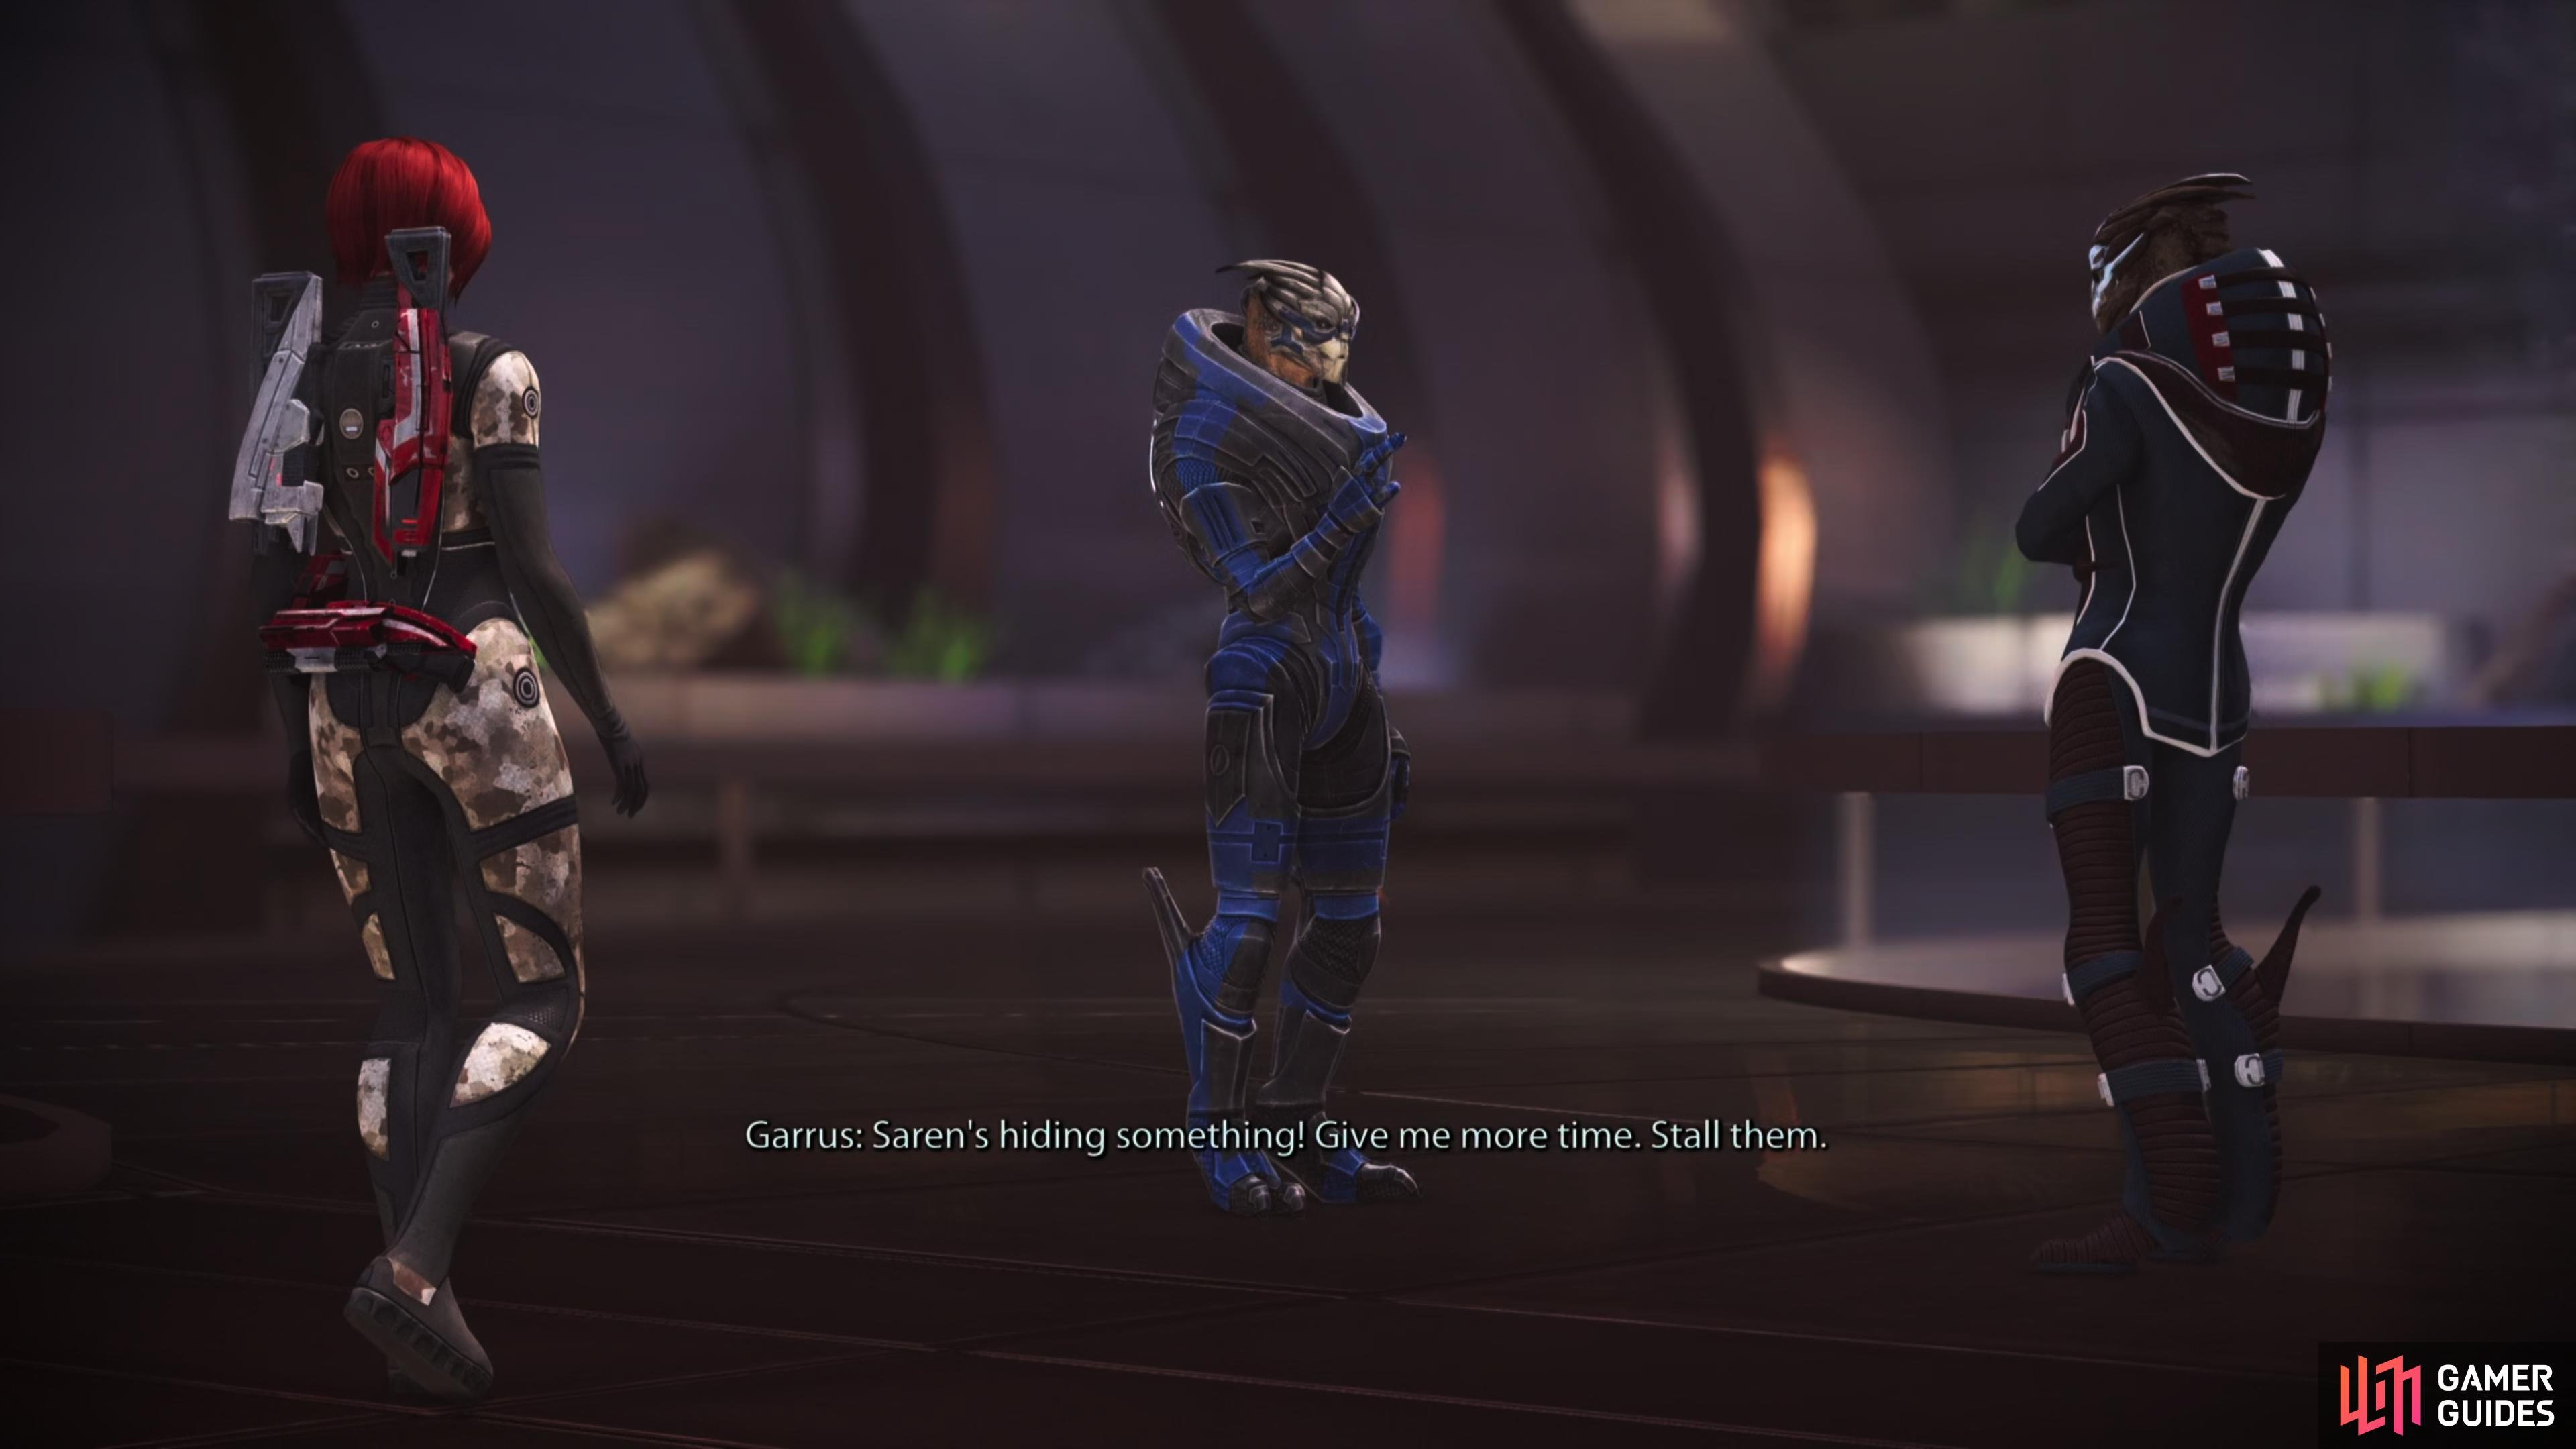 In the council you'll meet Garrus, who is also hostile to Saren.